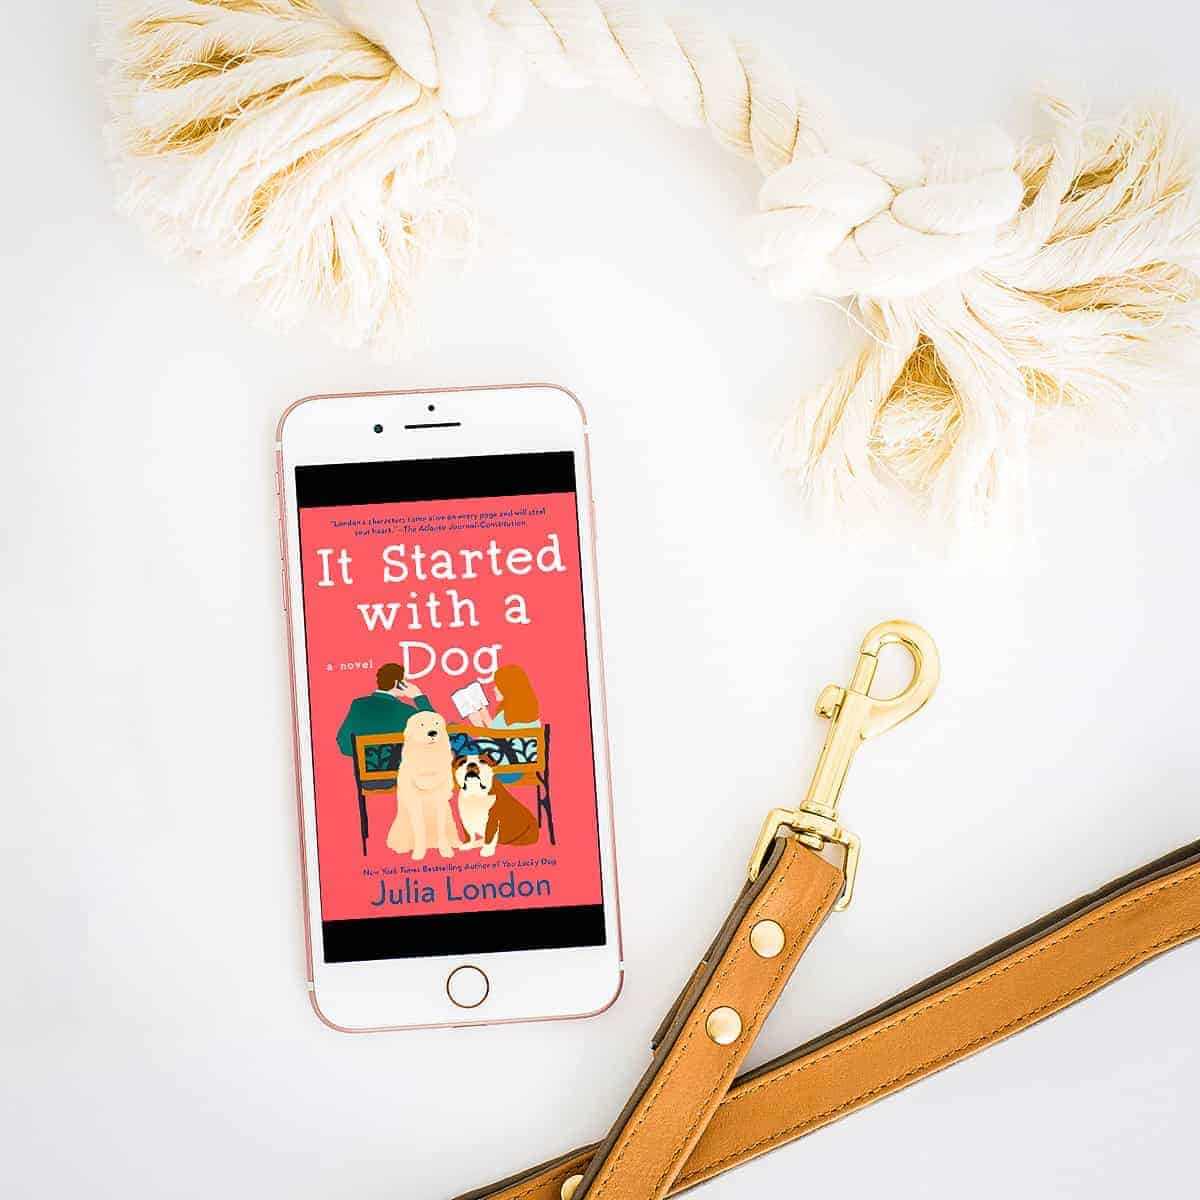 Read an Exclusive Excerpt from It Started with a Dog by Julia London!